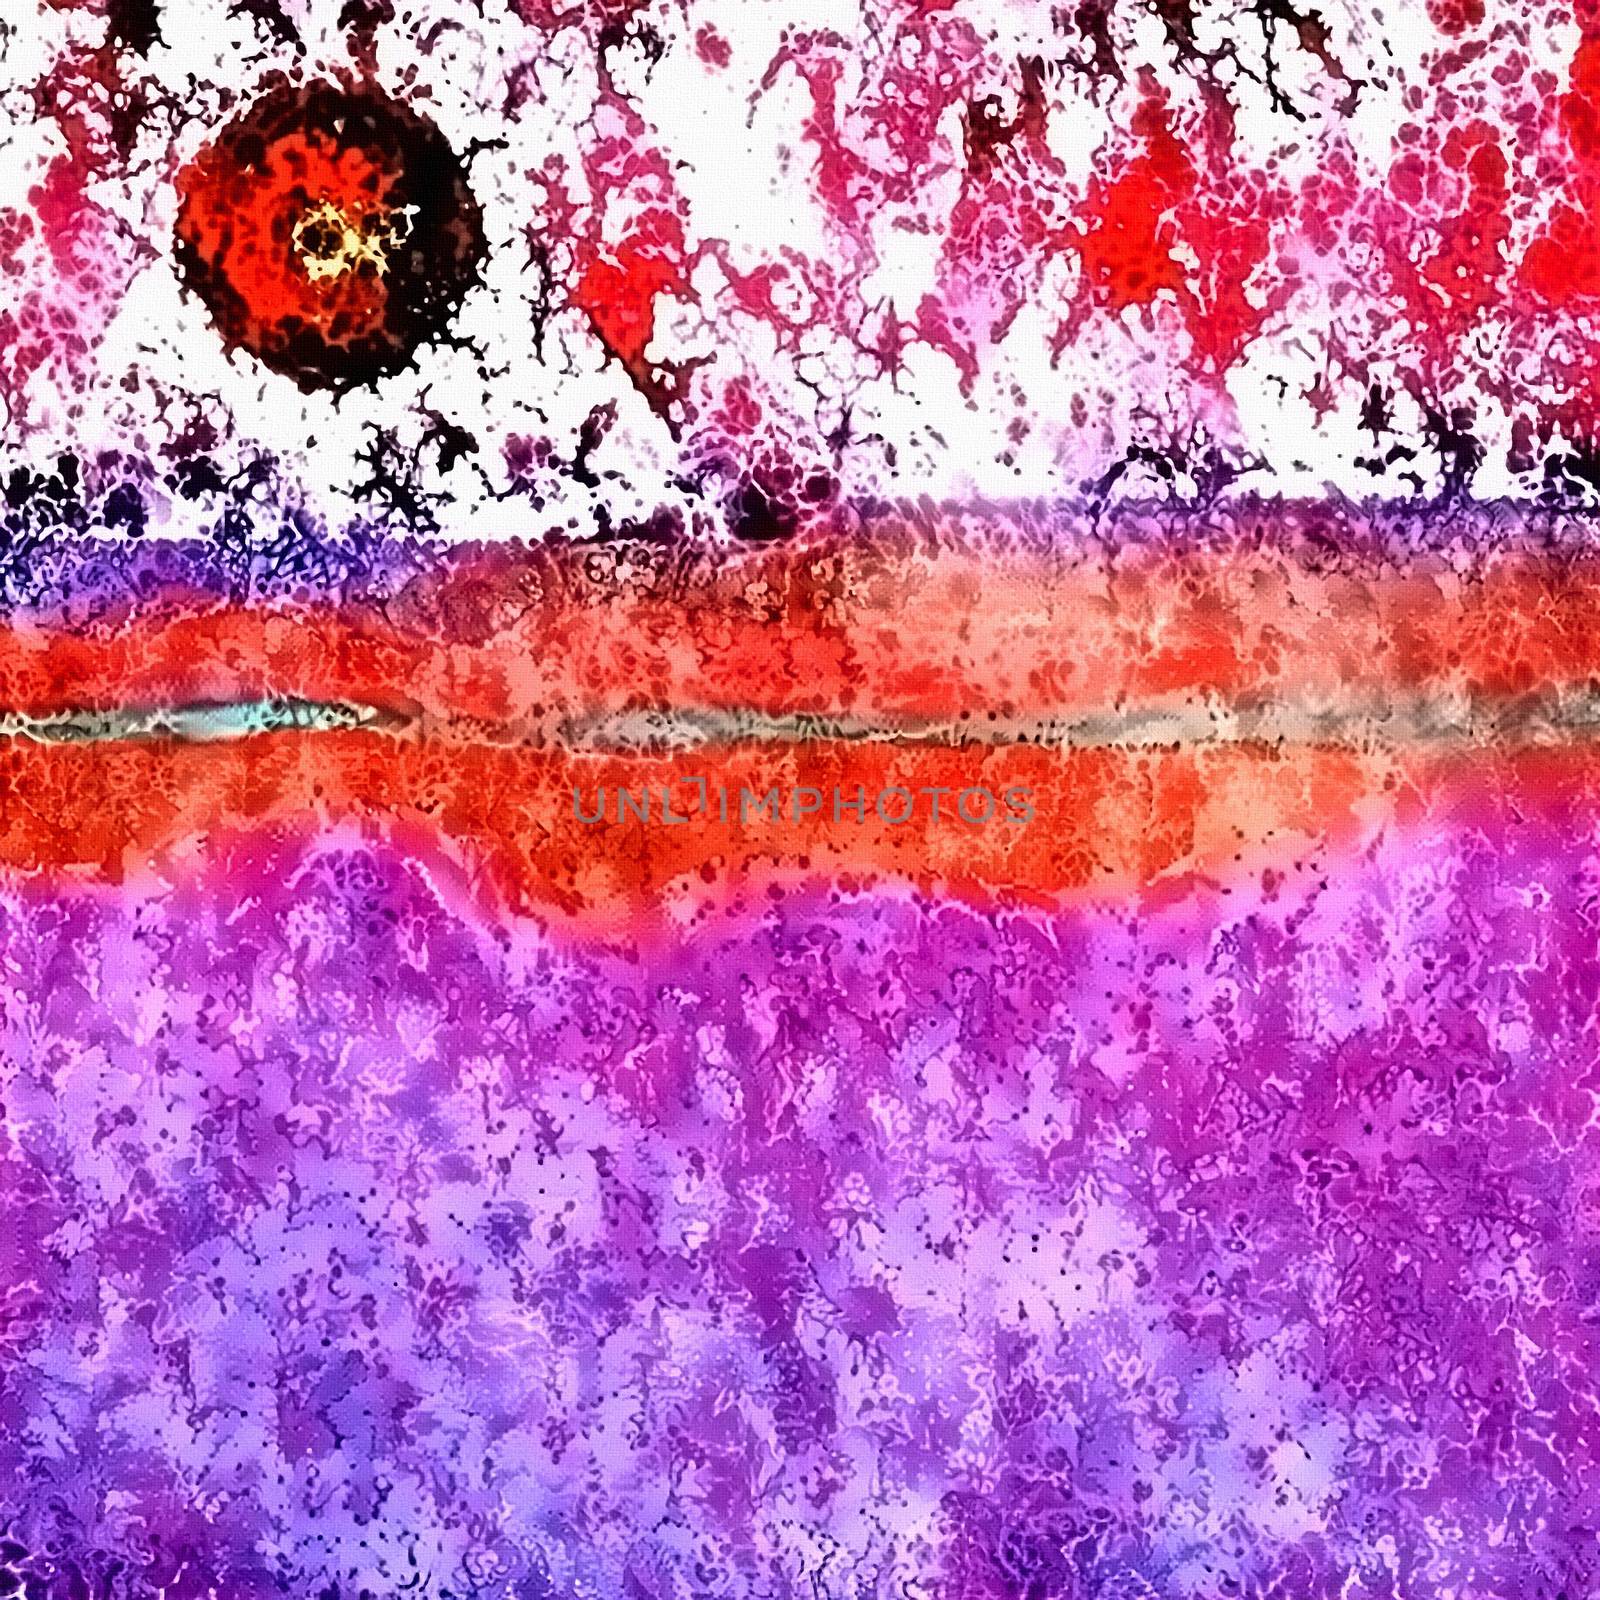 Abstract painting. Red sunset over purple ocean